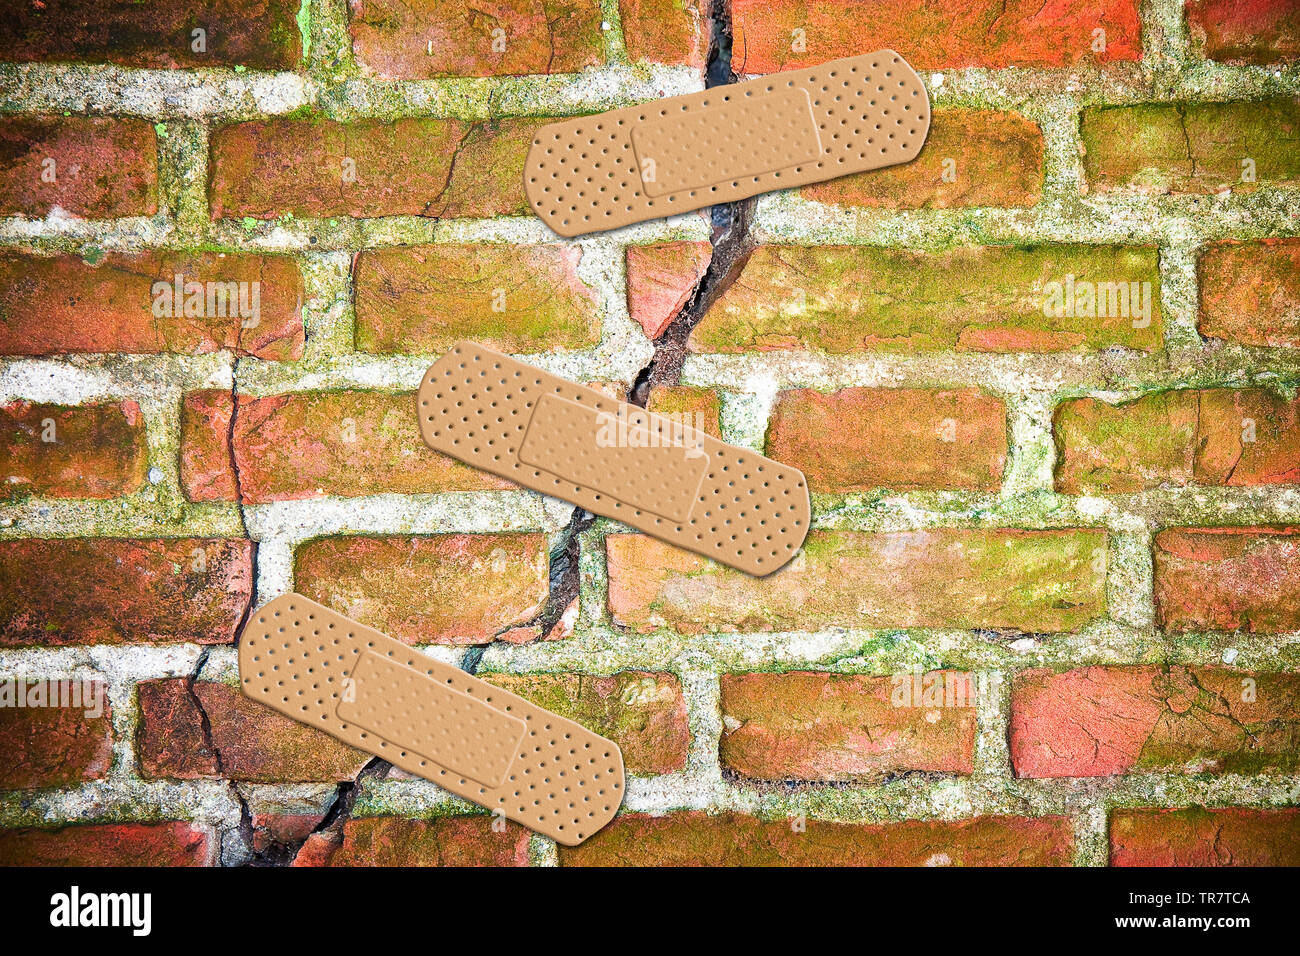 Renovation of an old cracked brick wall - concept image with bandaid patch Stock Photo